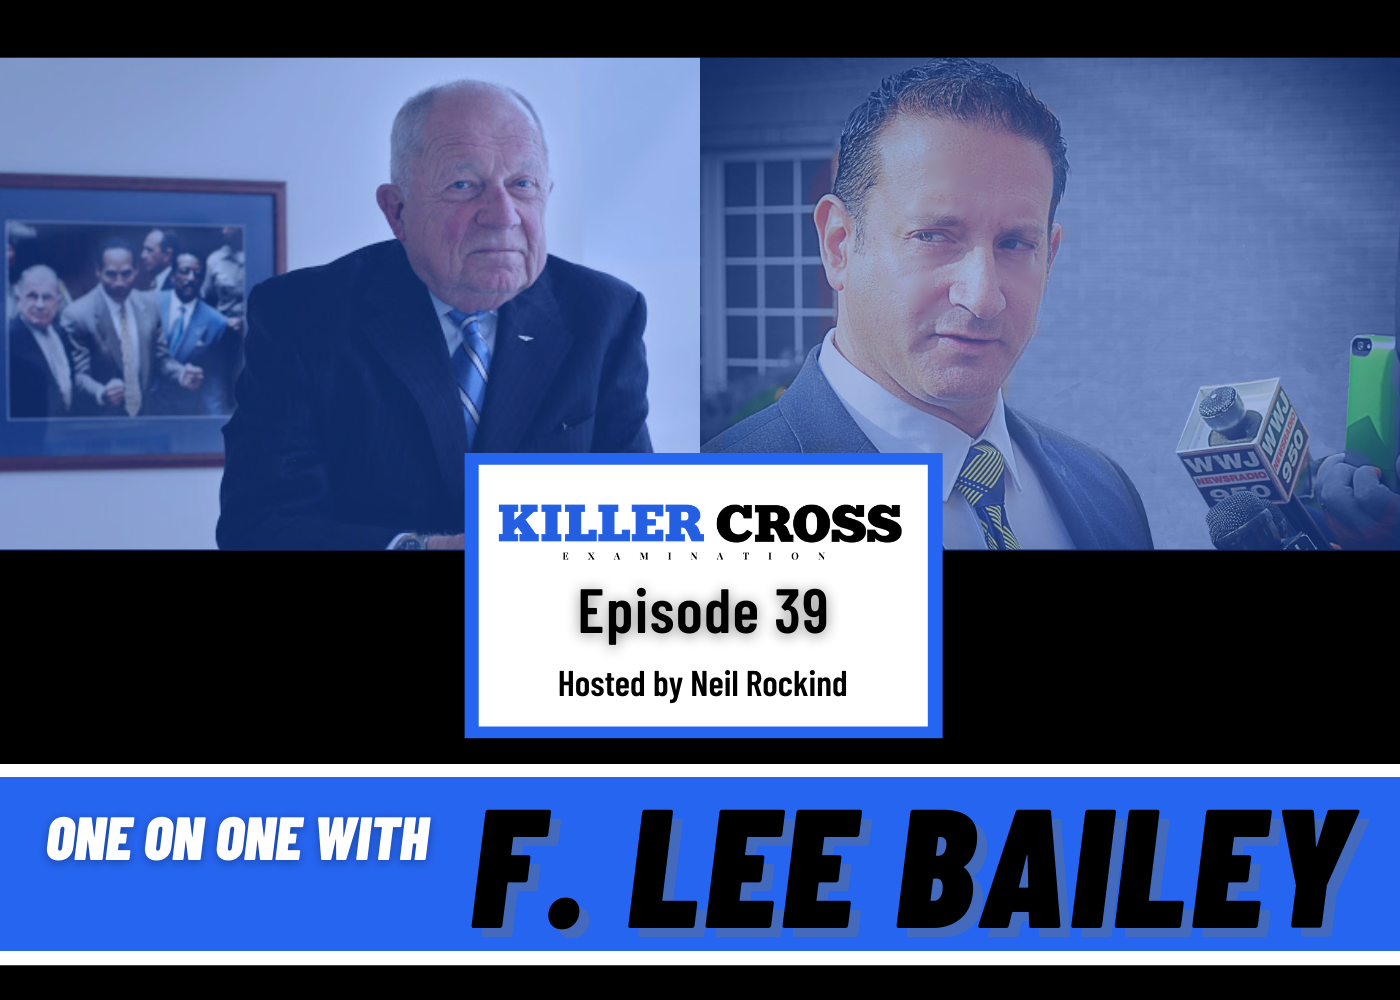 Episode 39: One on One with F. Lee Bailey